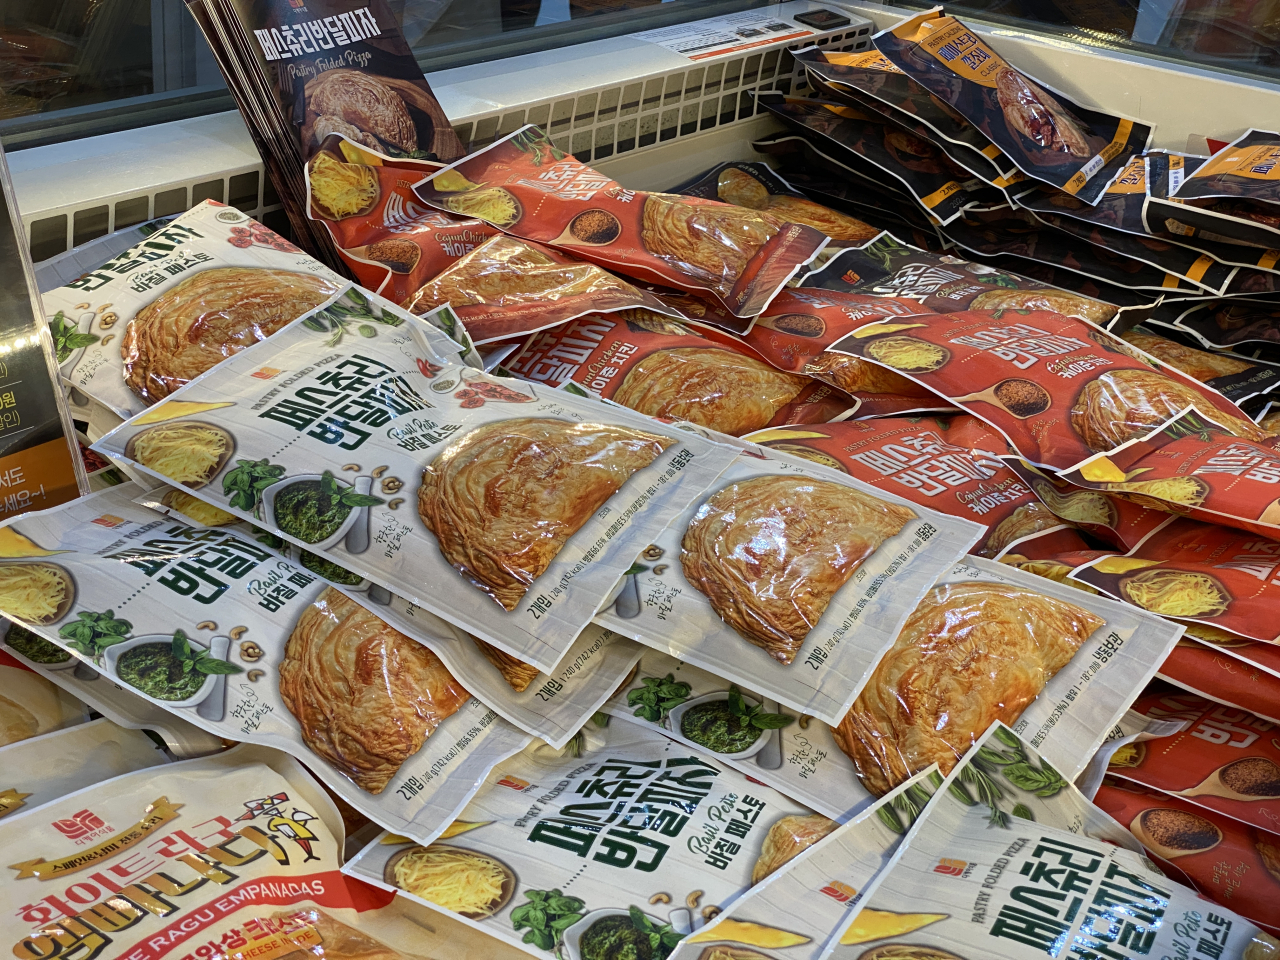 Packages of Dkfoods's frozen pizza product are on display at 2023 Coex Food Week, held at Coex in southern Seoul, Wednesday. (Hwang Joo-young/The Korea Herald)